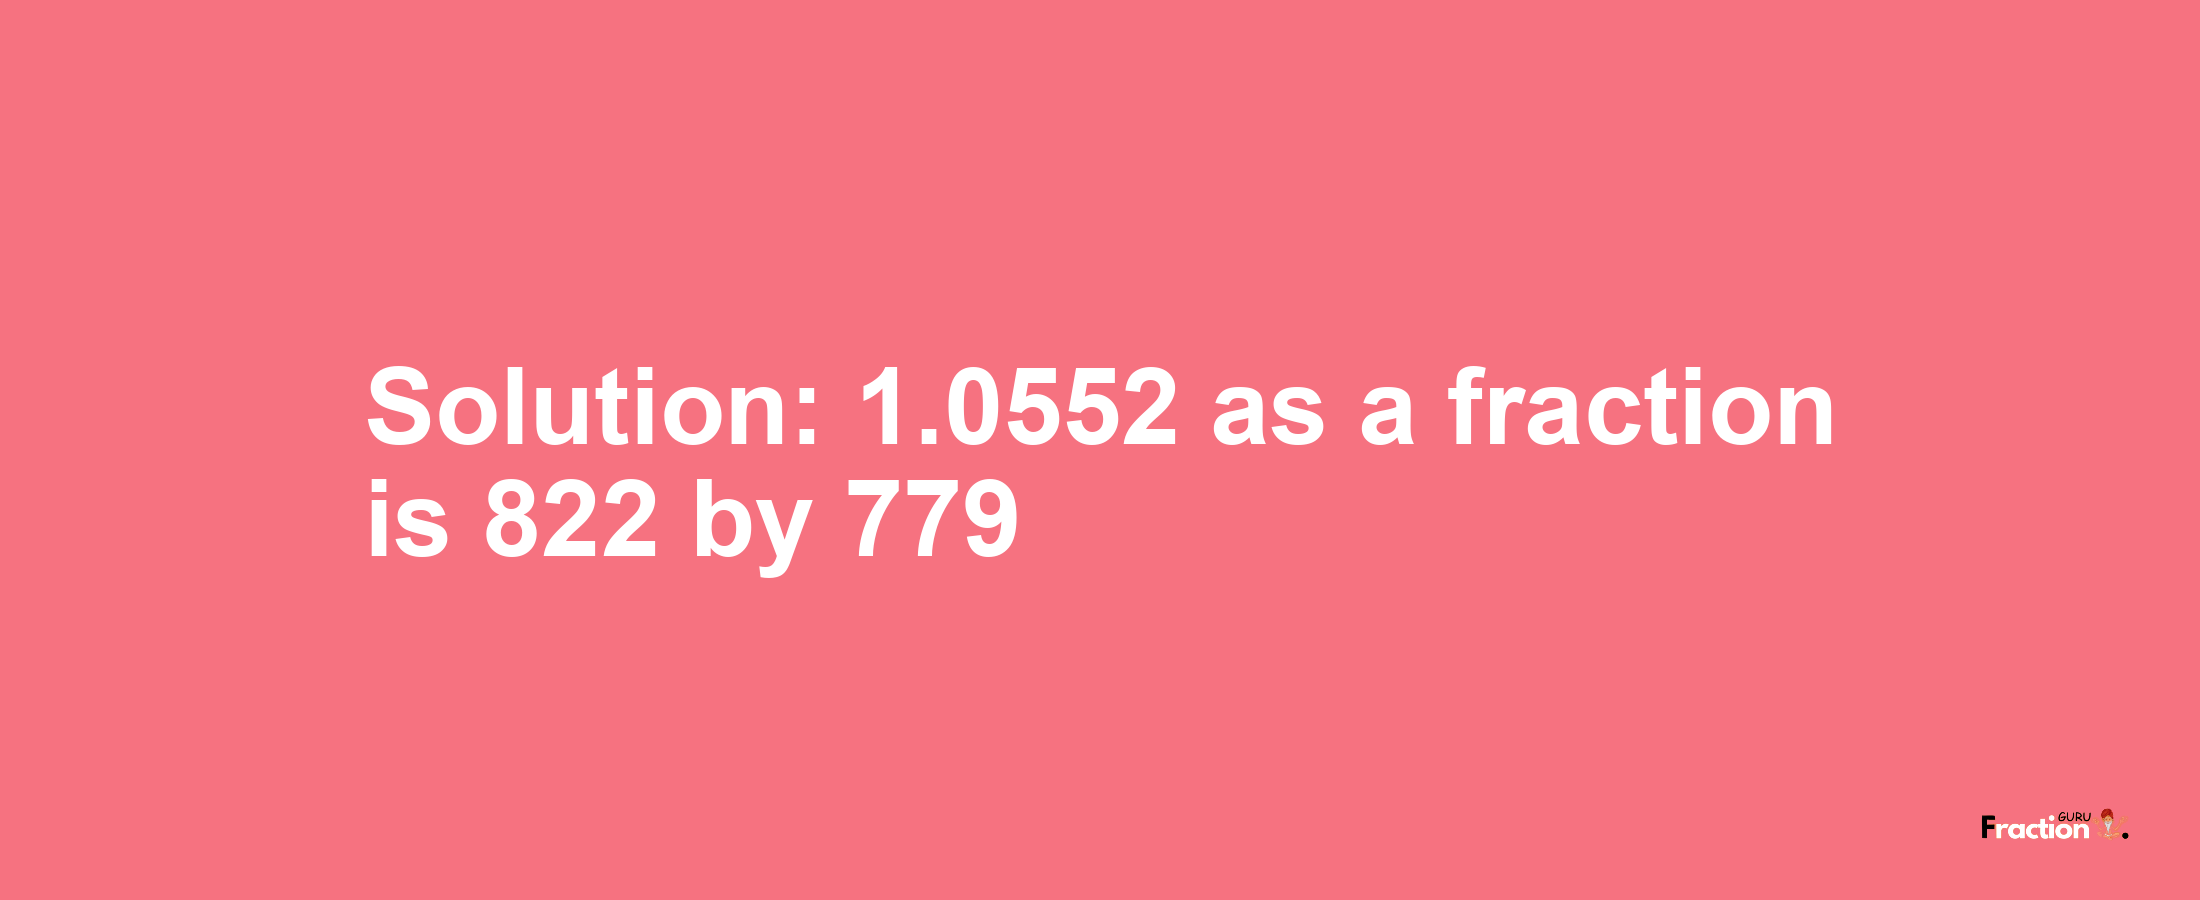 Solution:1.0552 as a fraction is 822/779